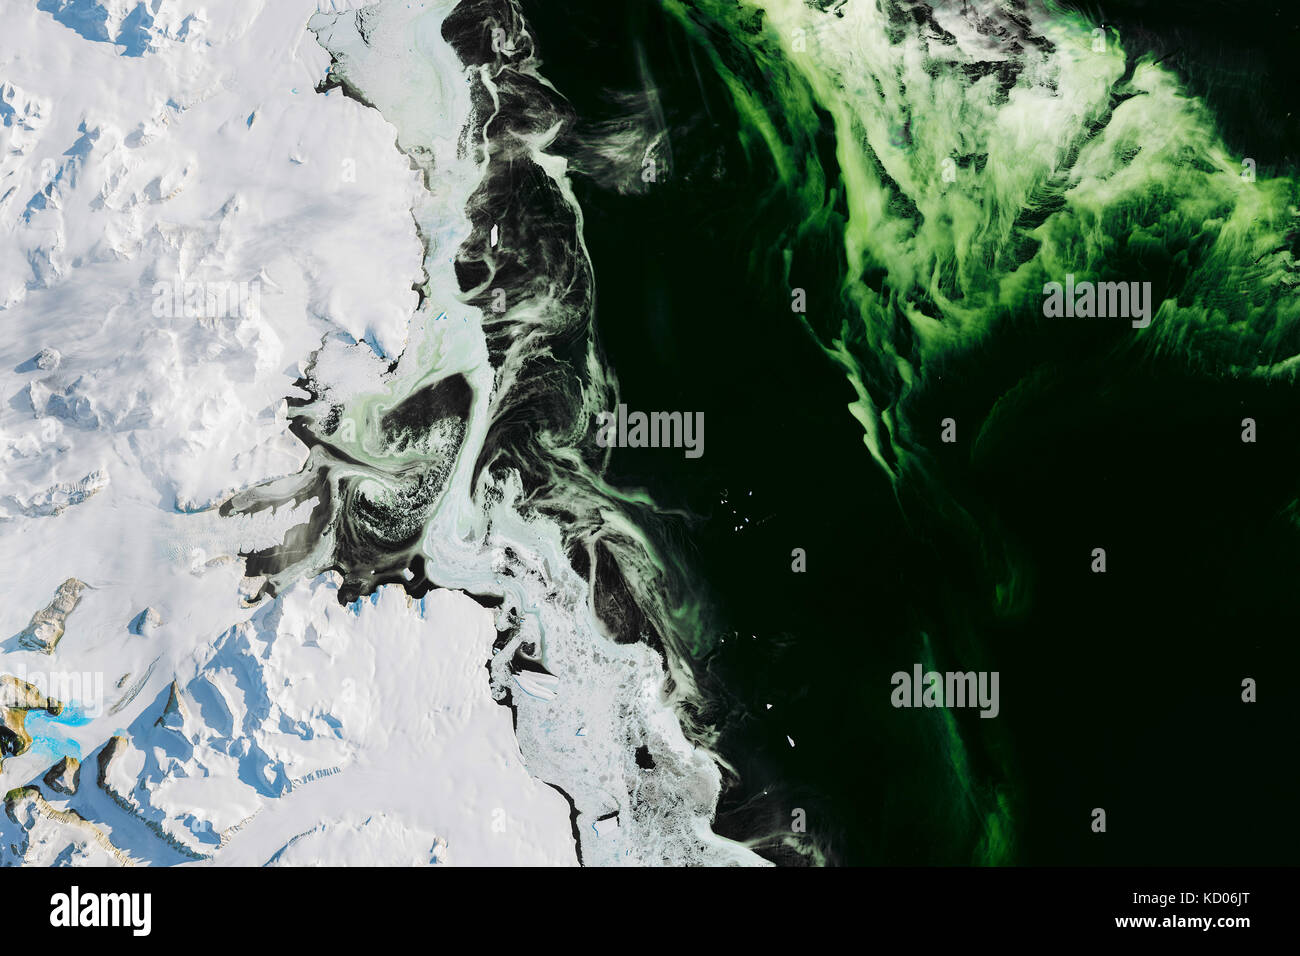 Satellite image of water, sea ice, and phytoplankton. The region pictured is Antarctica’s Granite Harbor—a cove in the vicinity of the Ross Sea. Stock Photo